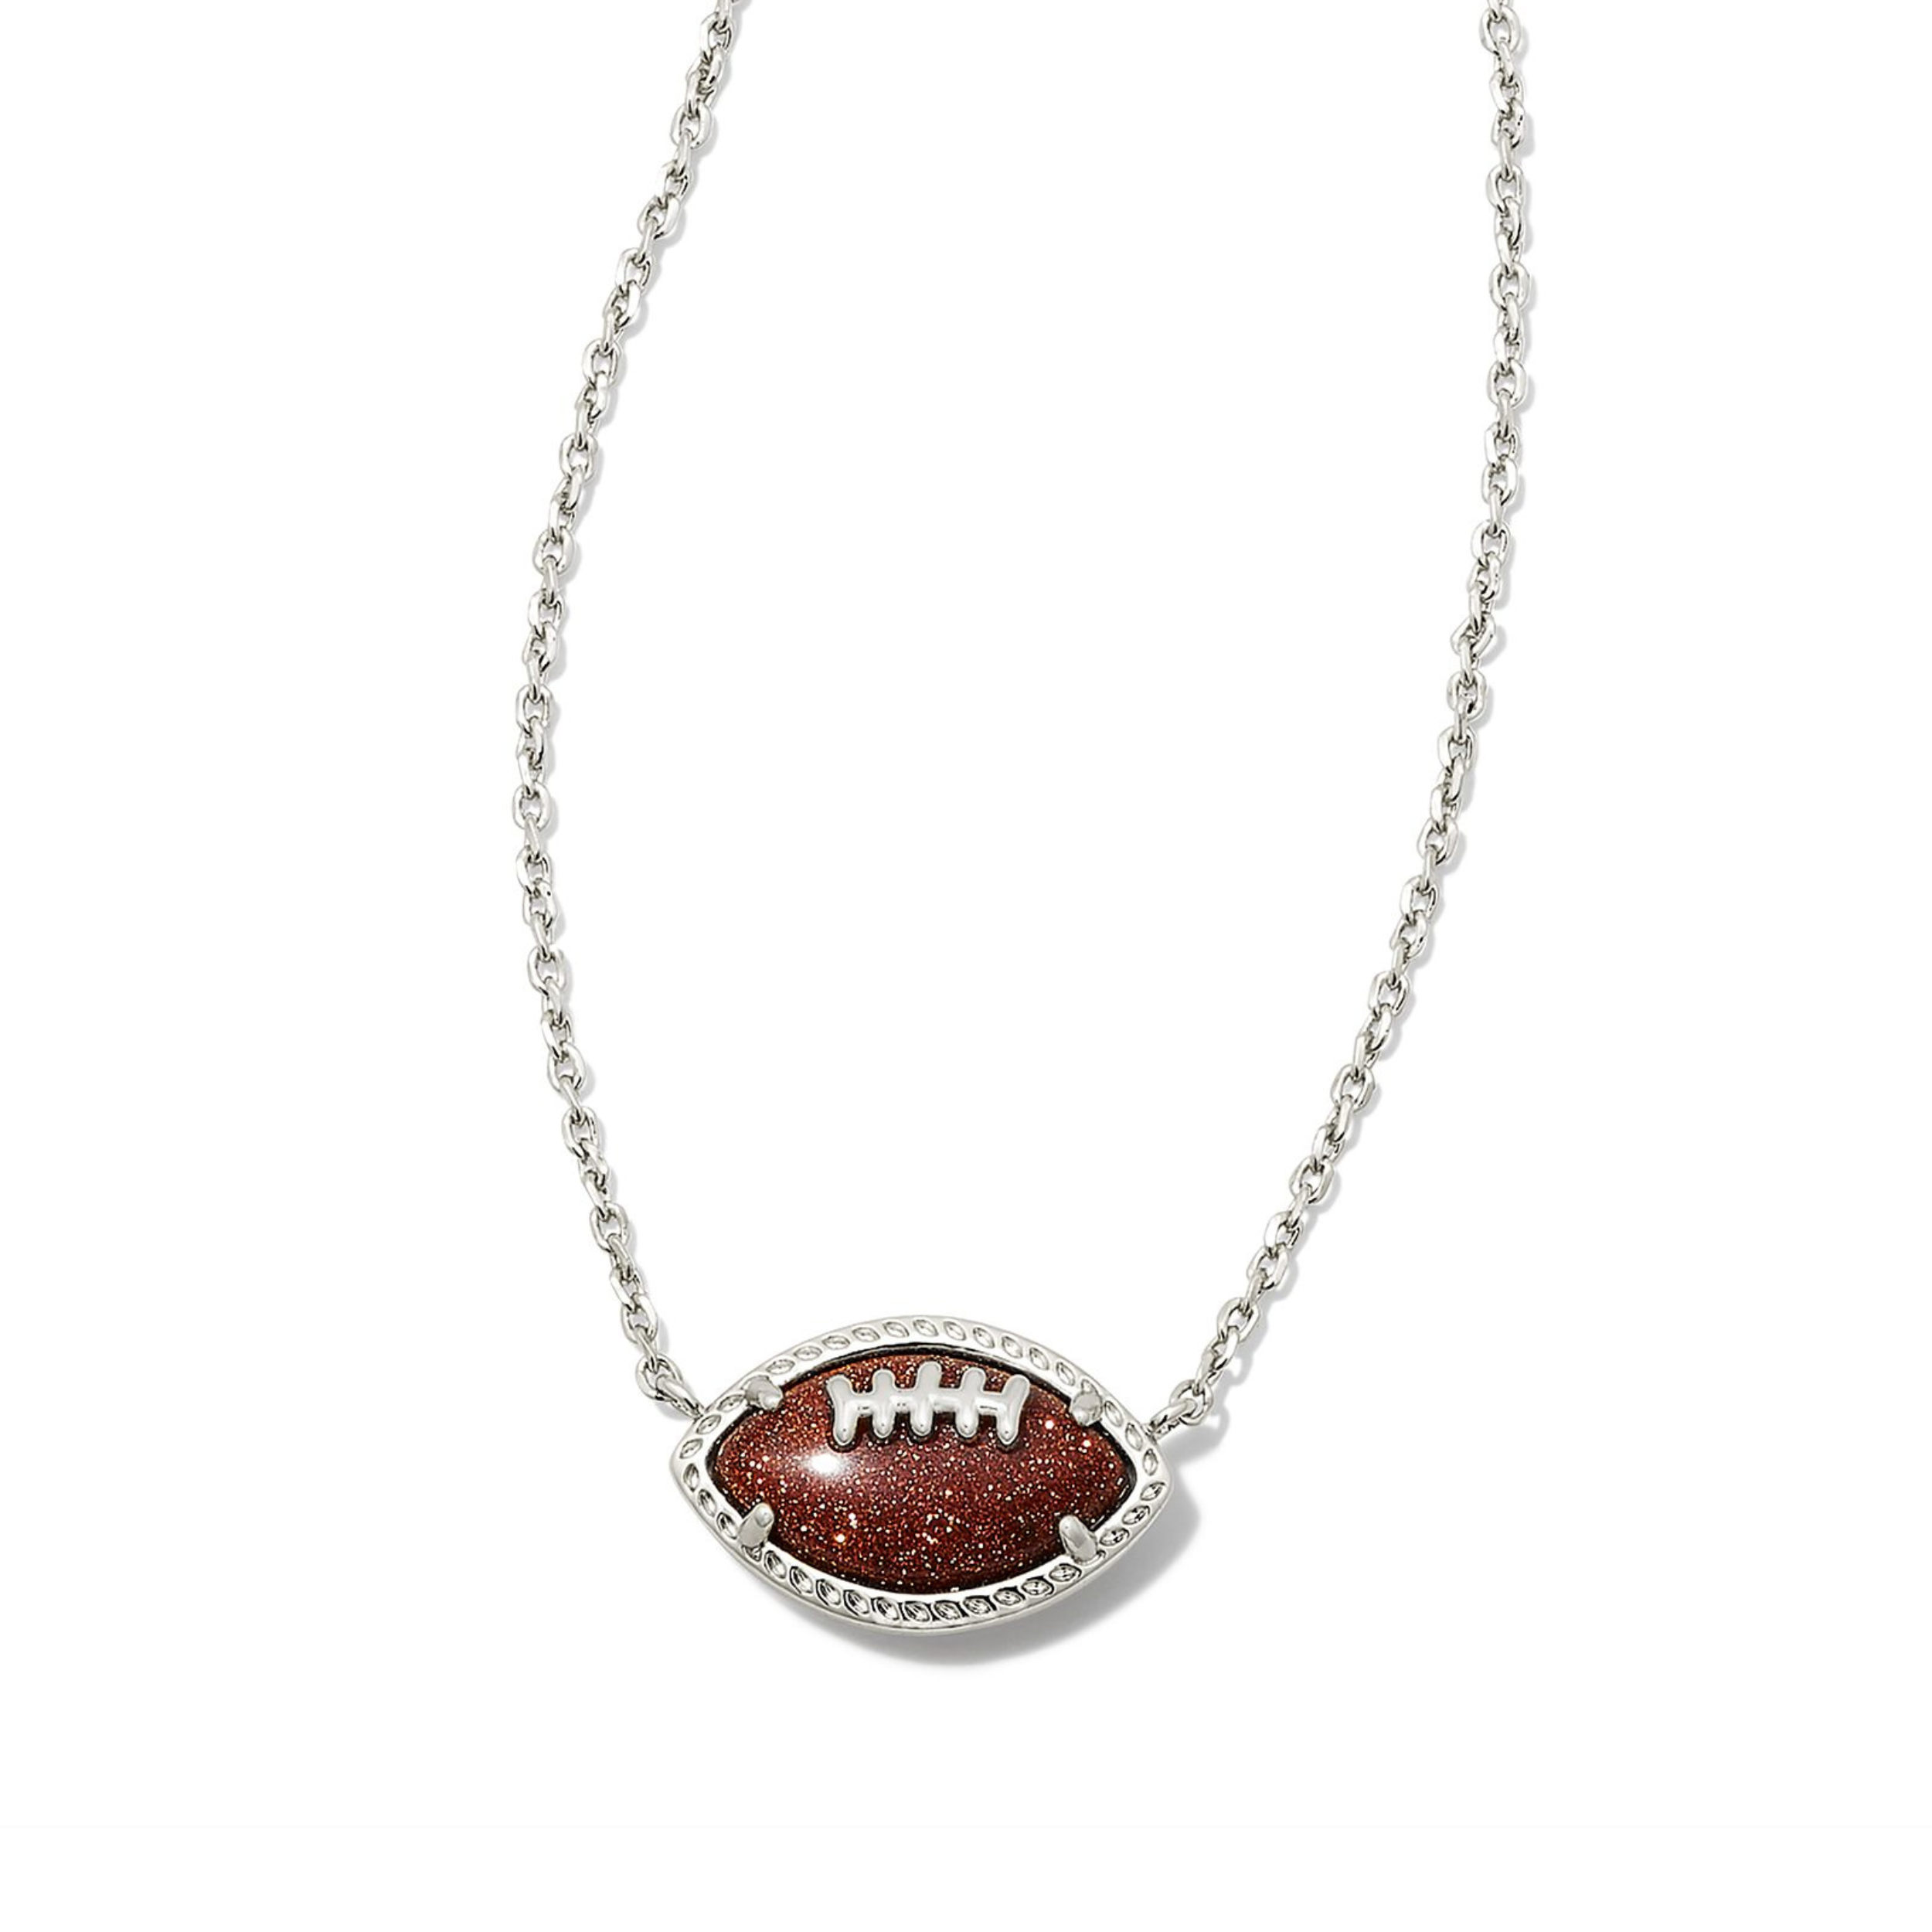 Pictured on a white background is a silver necklace with a brown football pendant.  